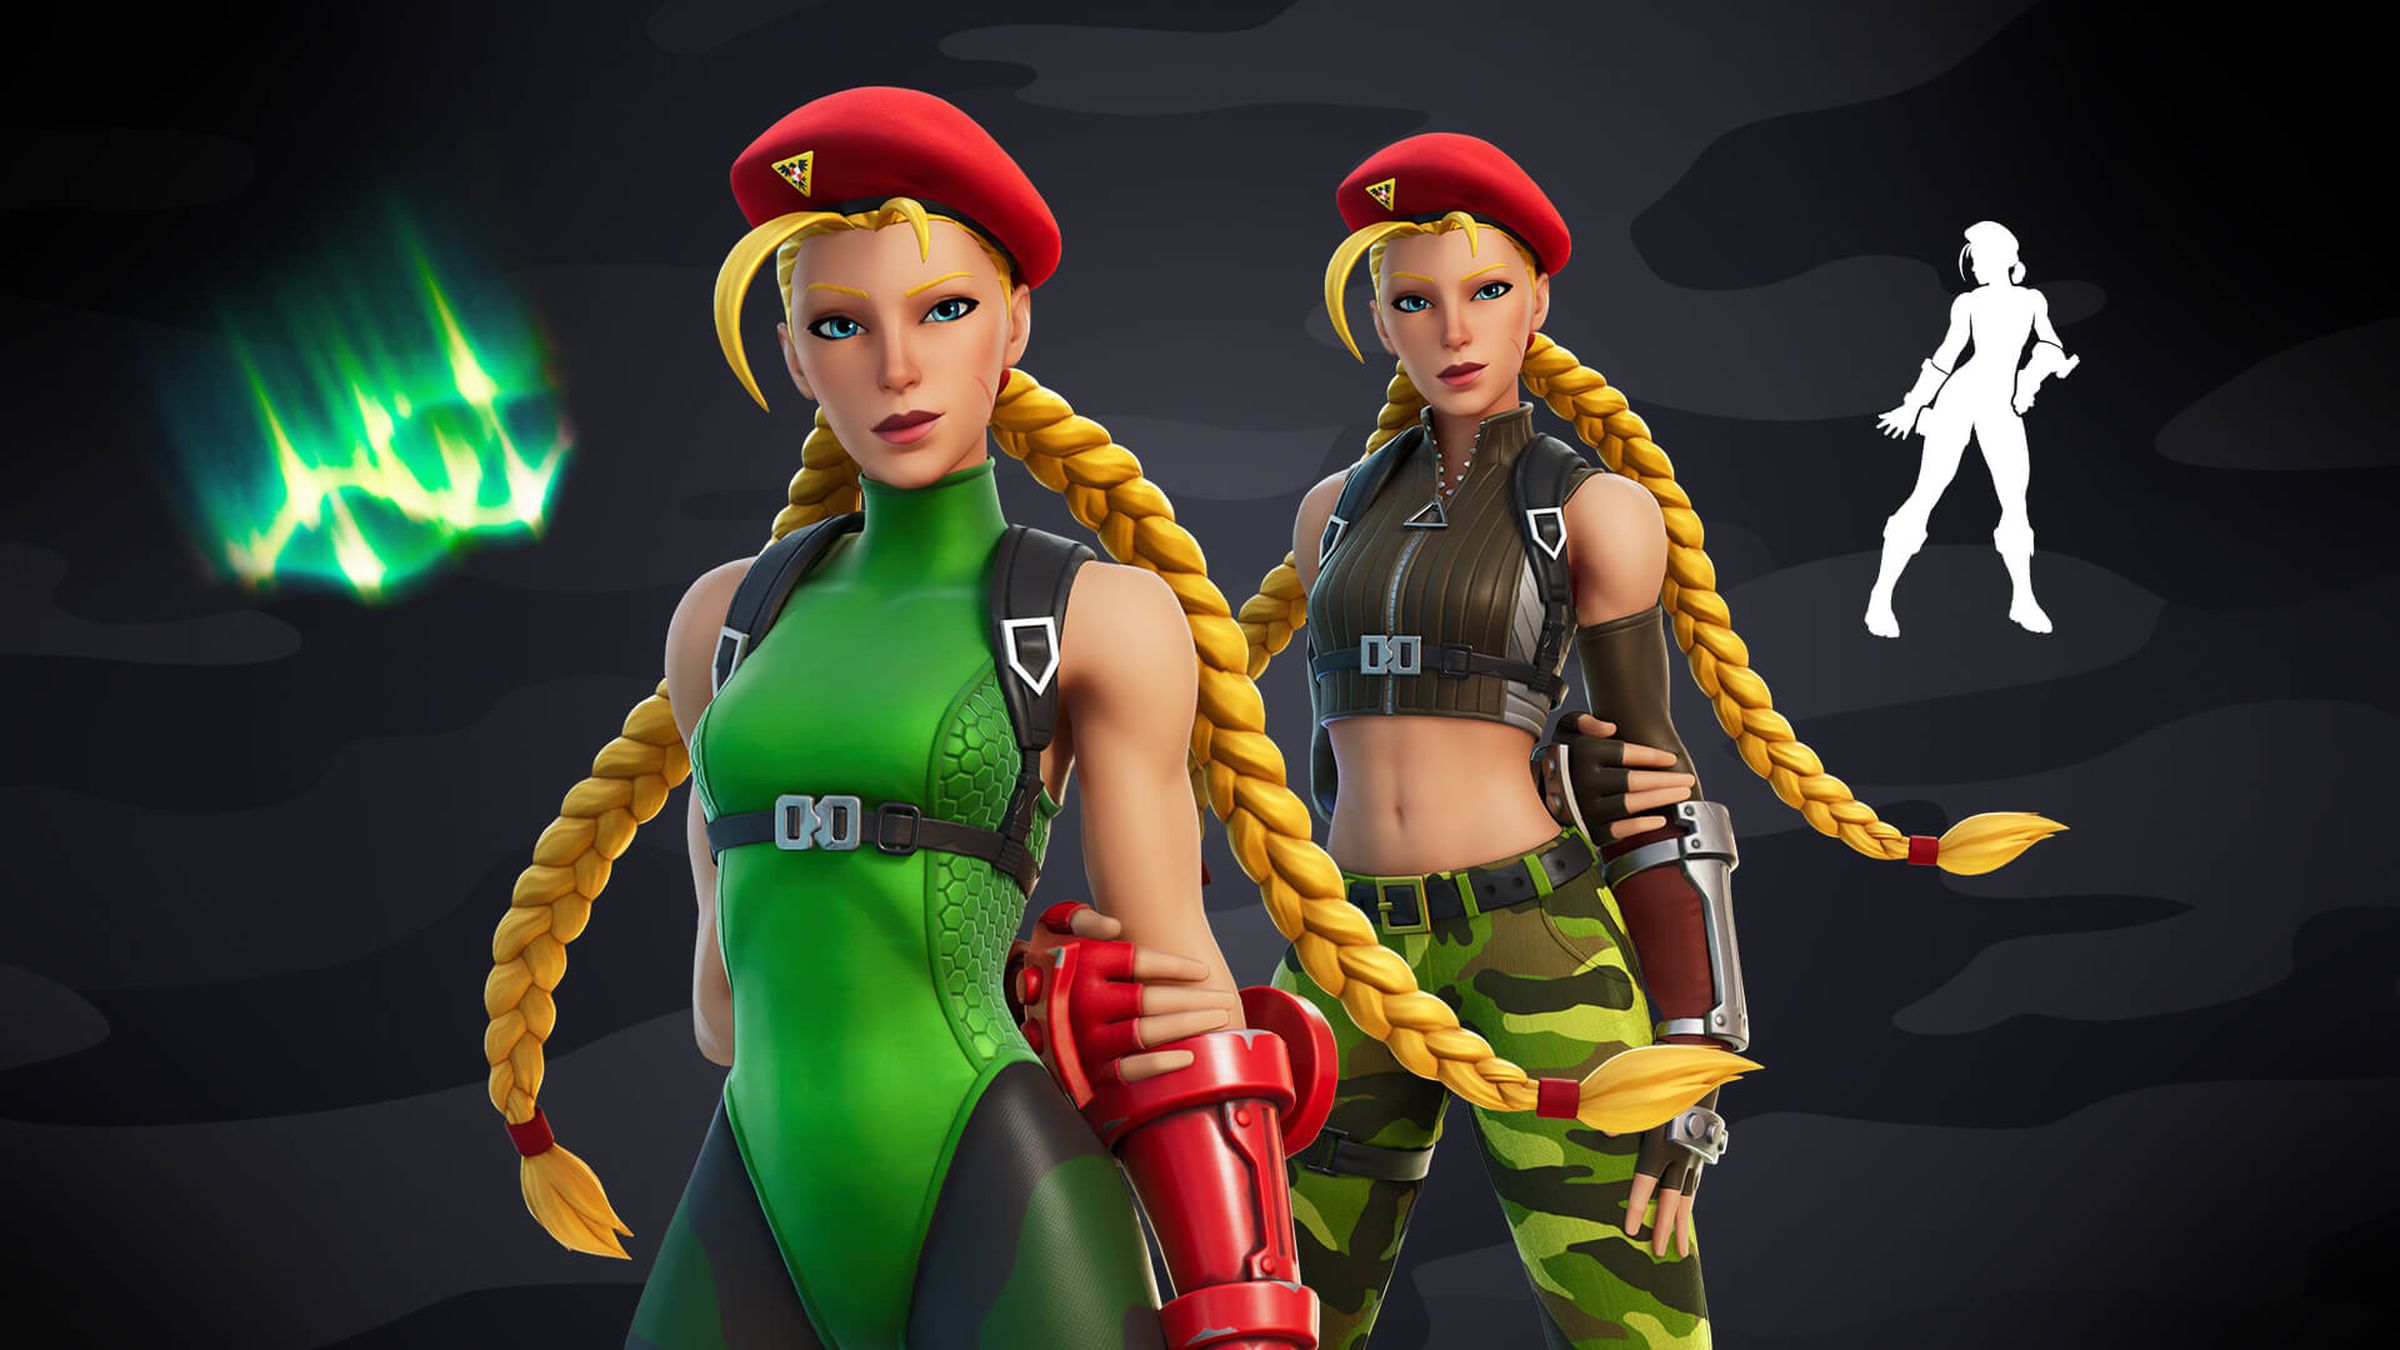 And here are Cammy’s cosmetics.